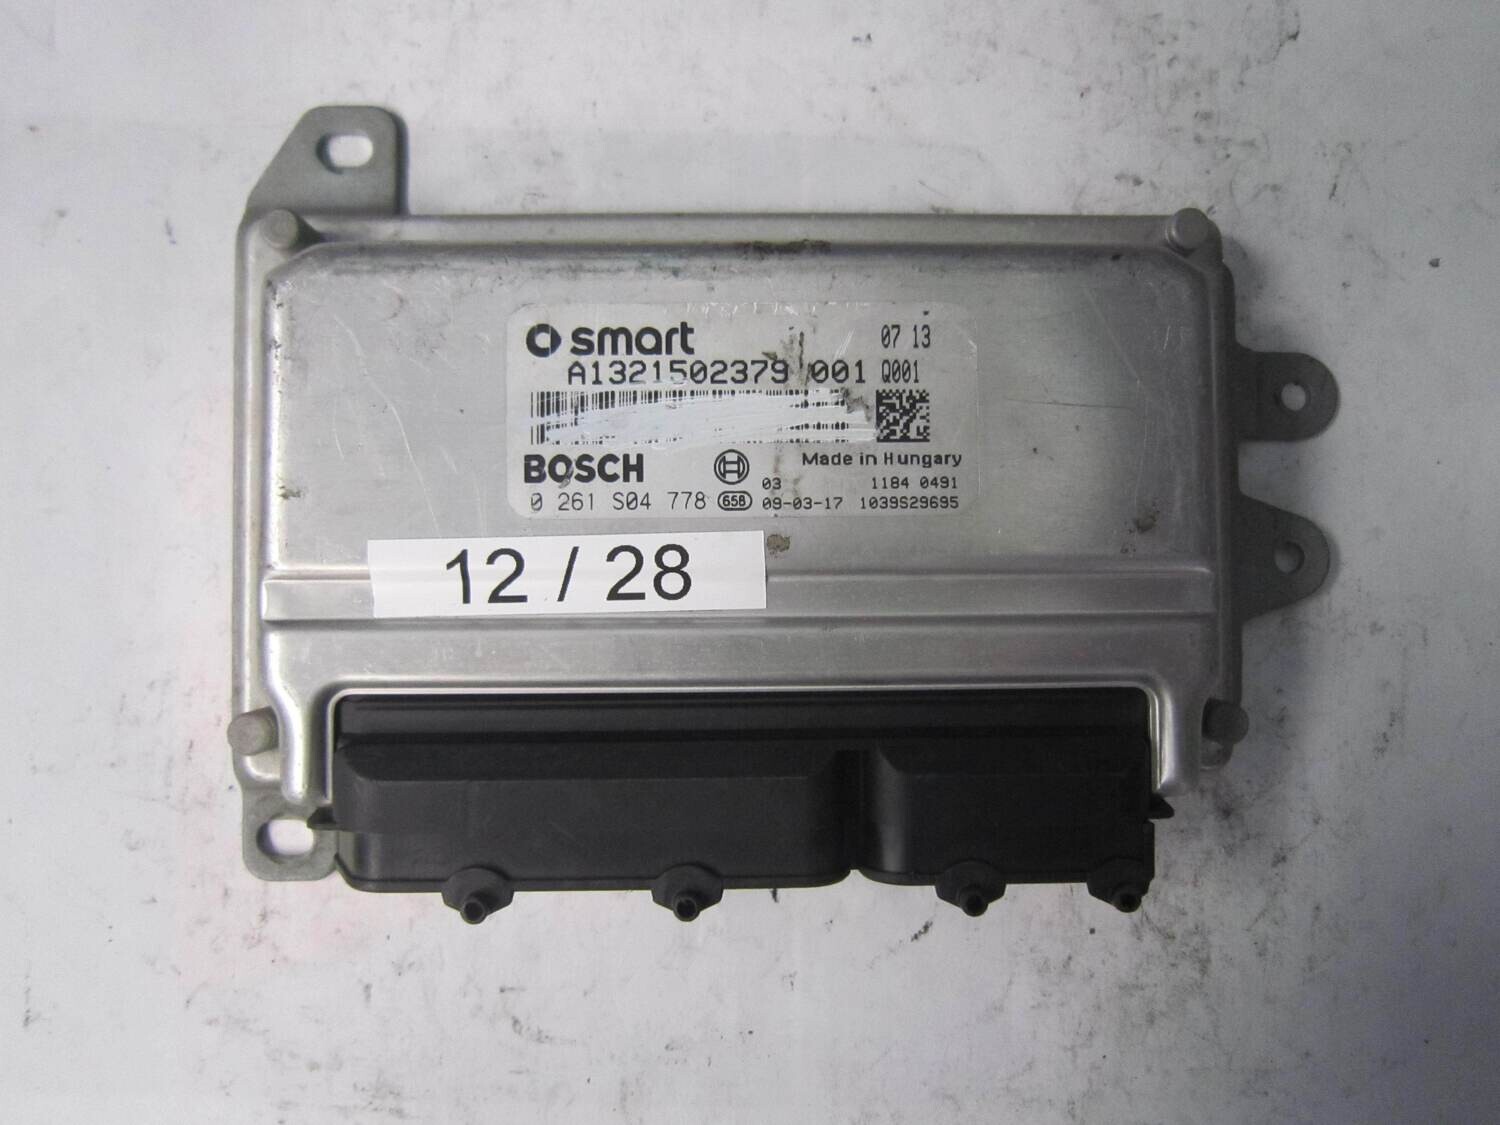 12-28 Centralina Motore Bosch 0261S04778 0 261 S04 778 A1321502379 1039S29695 SMART FORTWO 1.0